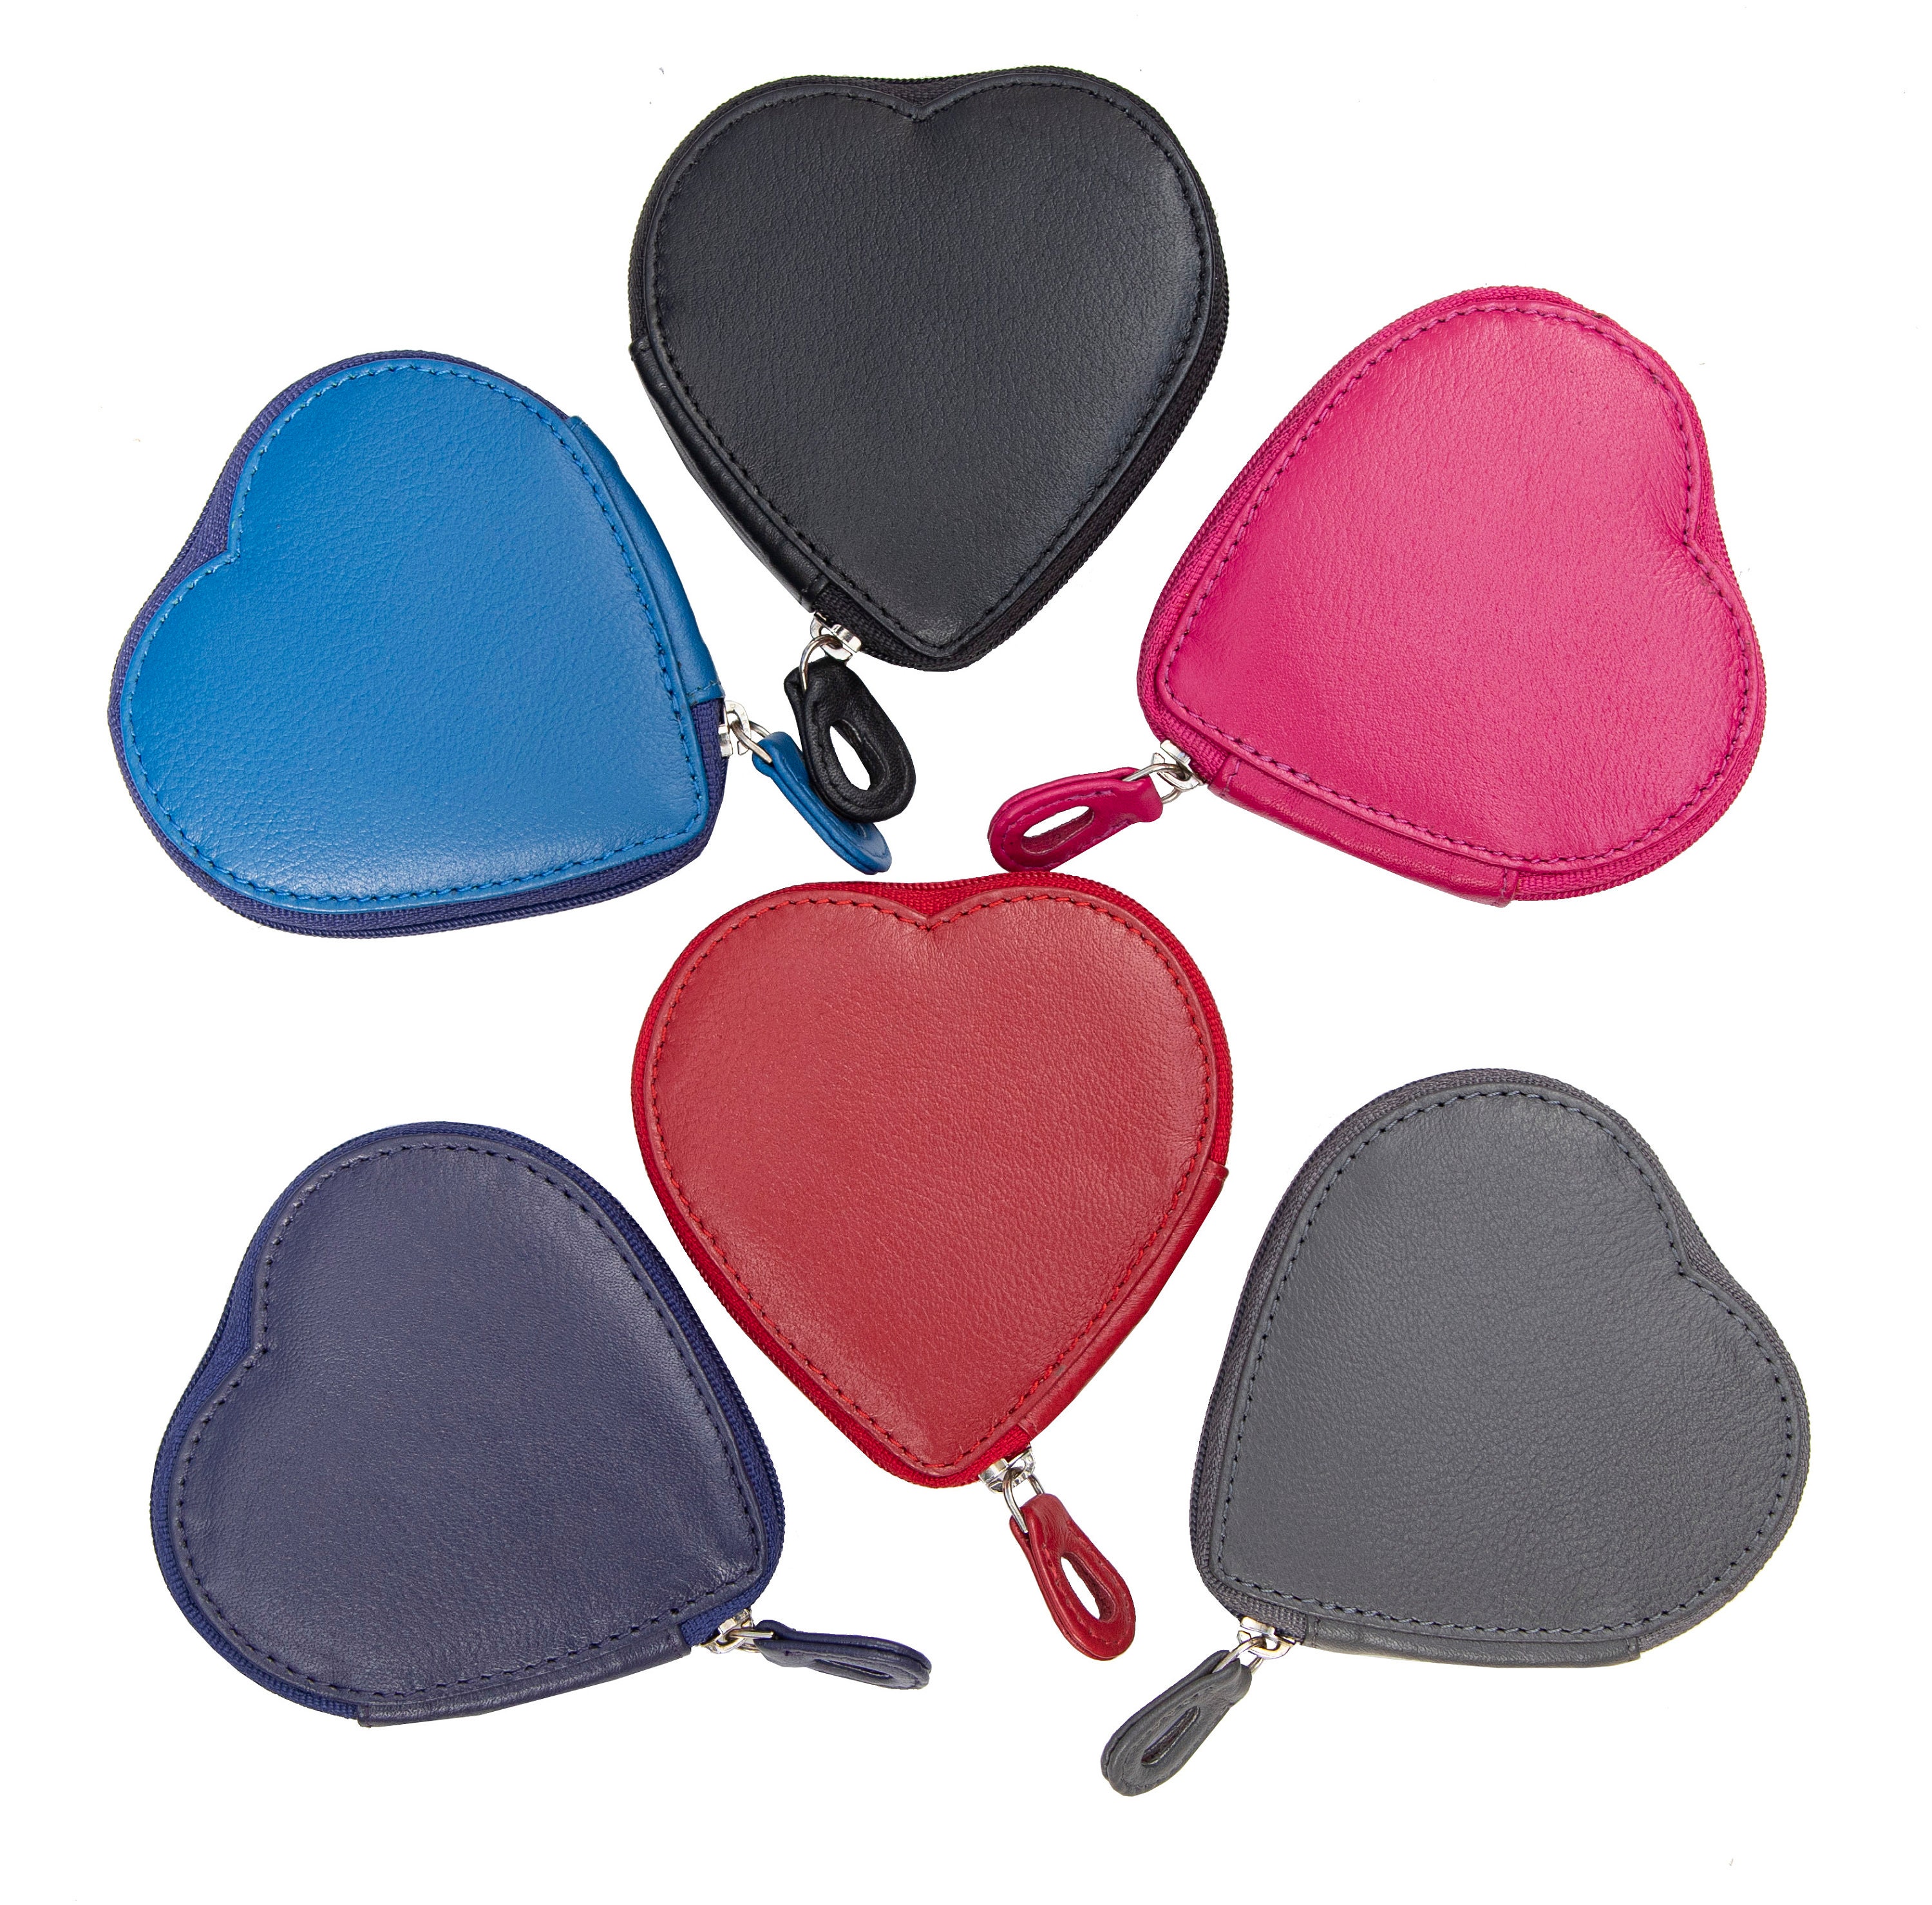 Heart Shaped Coin Purse - Lovely Embroidery on Vegan Leather – NGAOS UK